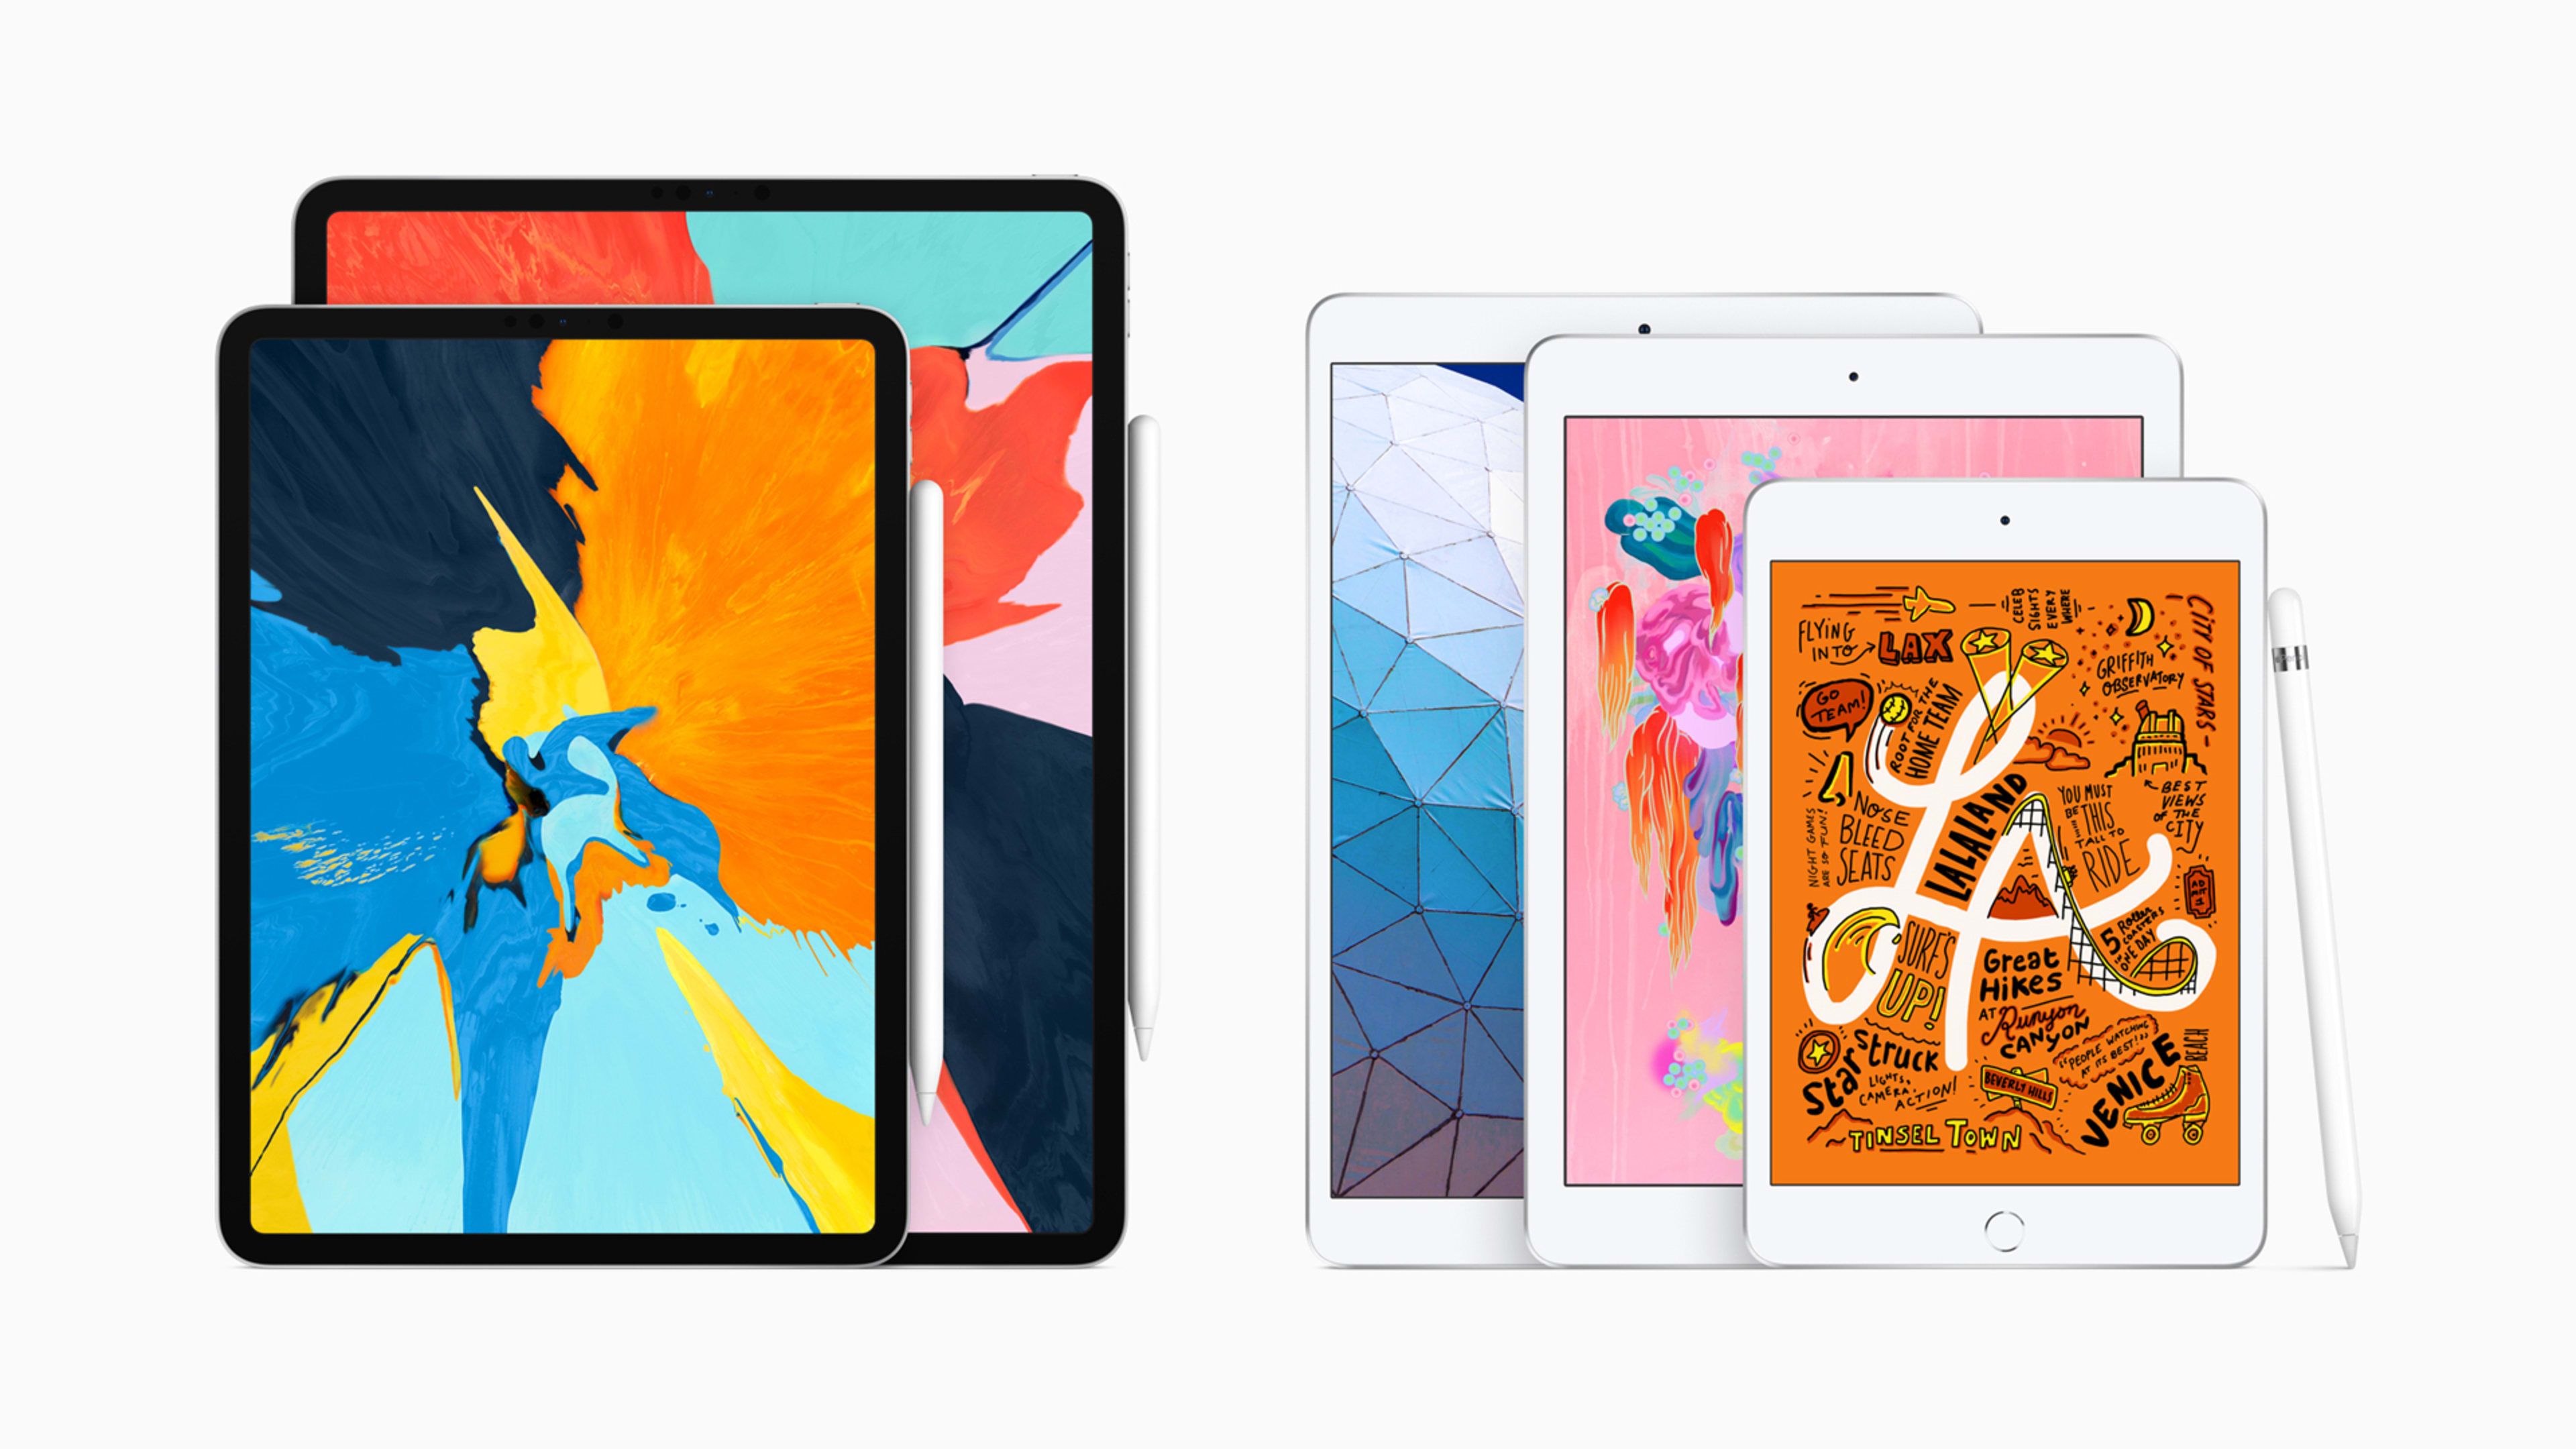 Apple revives the iPad Mini and iPad Air with new models